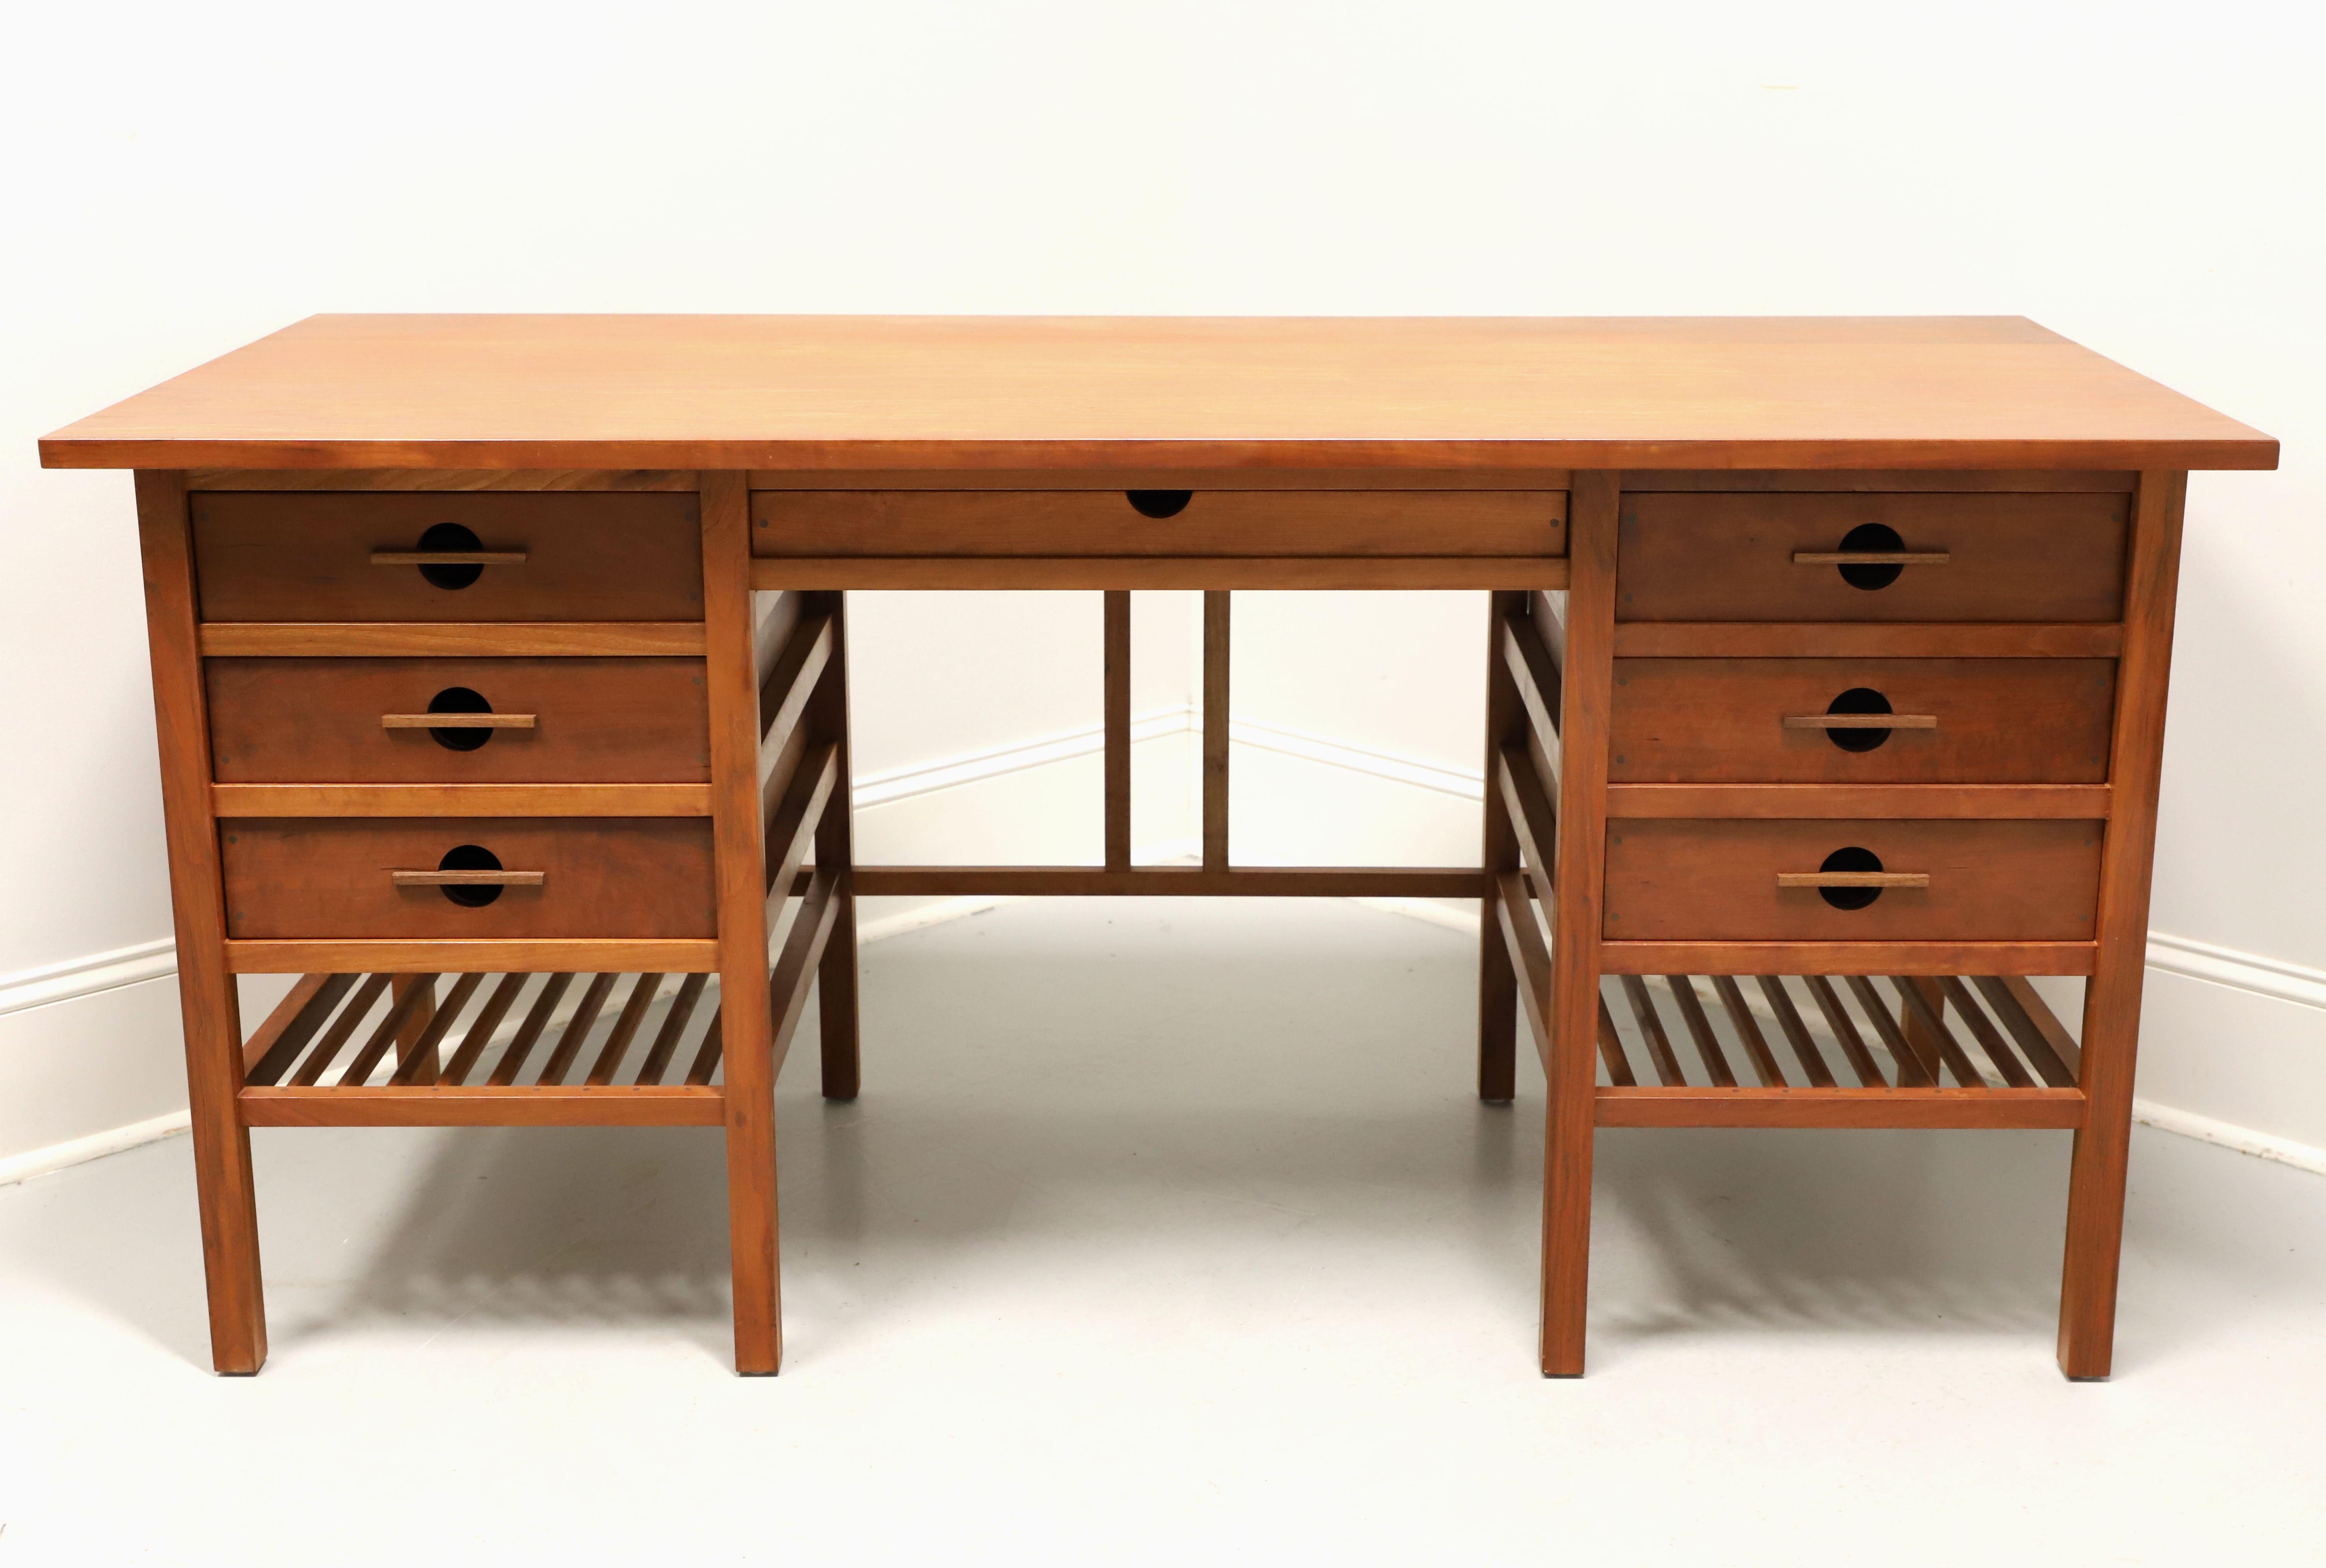 A Mission / Arts & Crafts style kneehole desk by John Kelly Furniture, the J-22A Secretary Desk, from their J1 Series. Solid black cherry with black walnut peg detailing to drawers, square edge overhanging top, signature exposed structural frame,